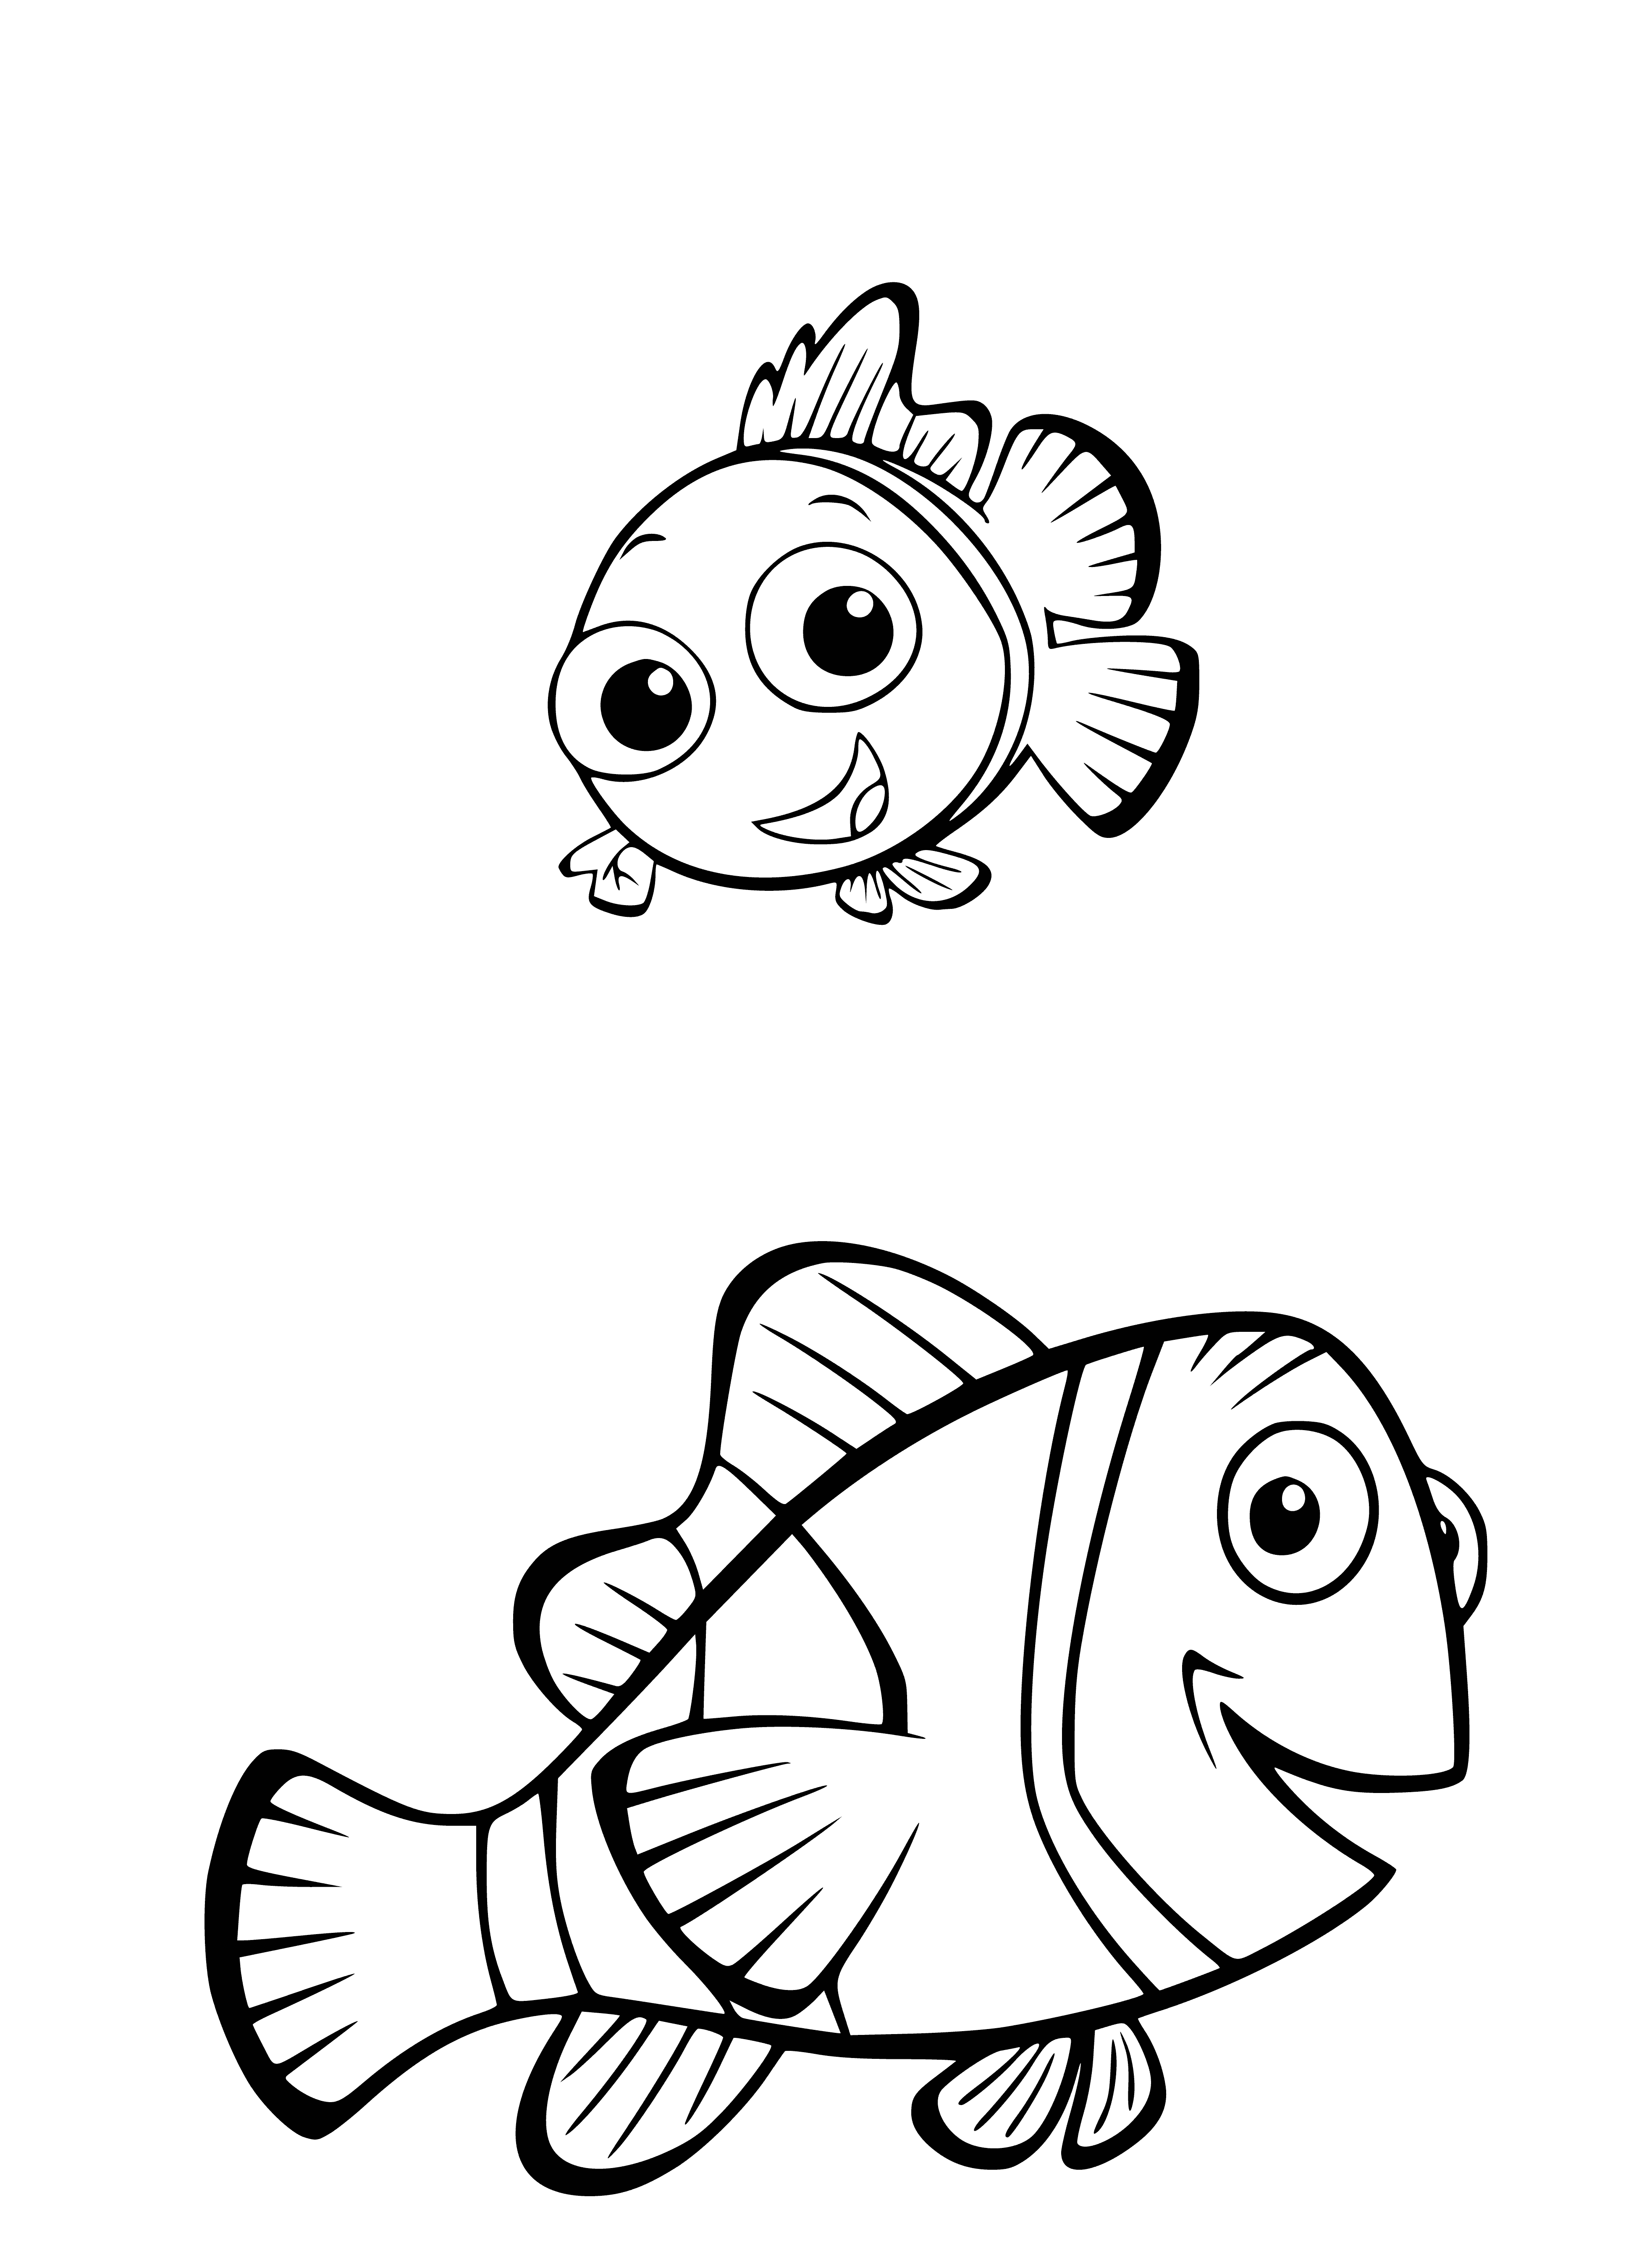 Nemo and the Pope coloring page